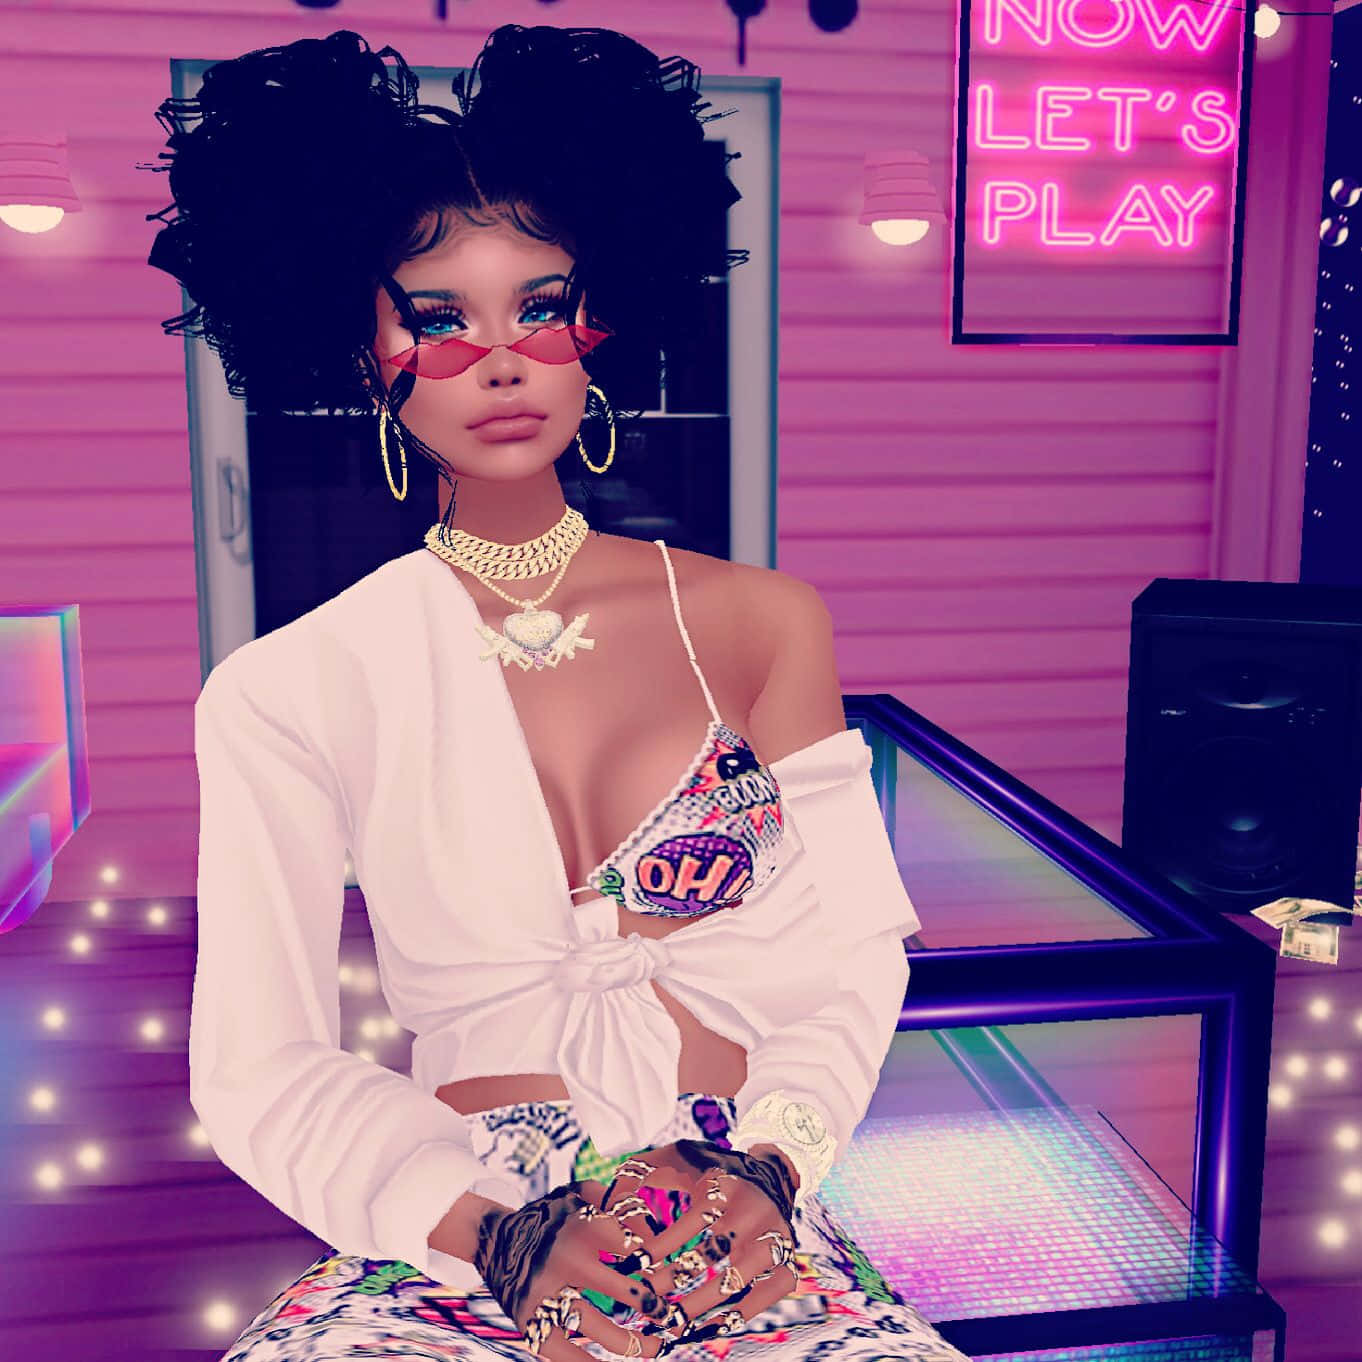 IMVU Avatar Hanging out in Virtual World